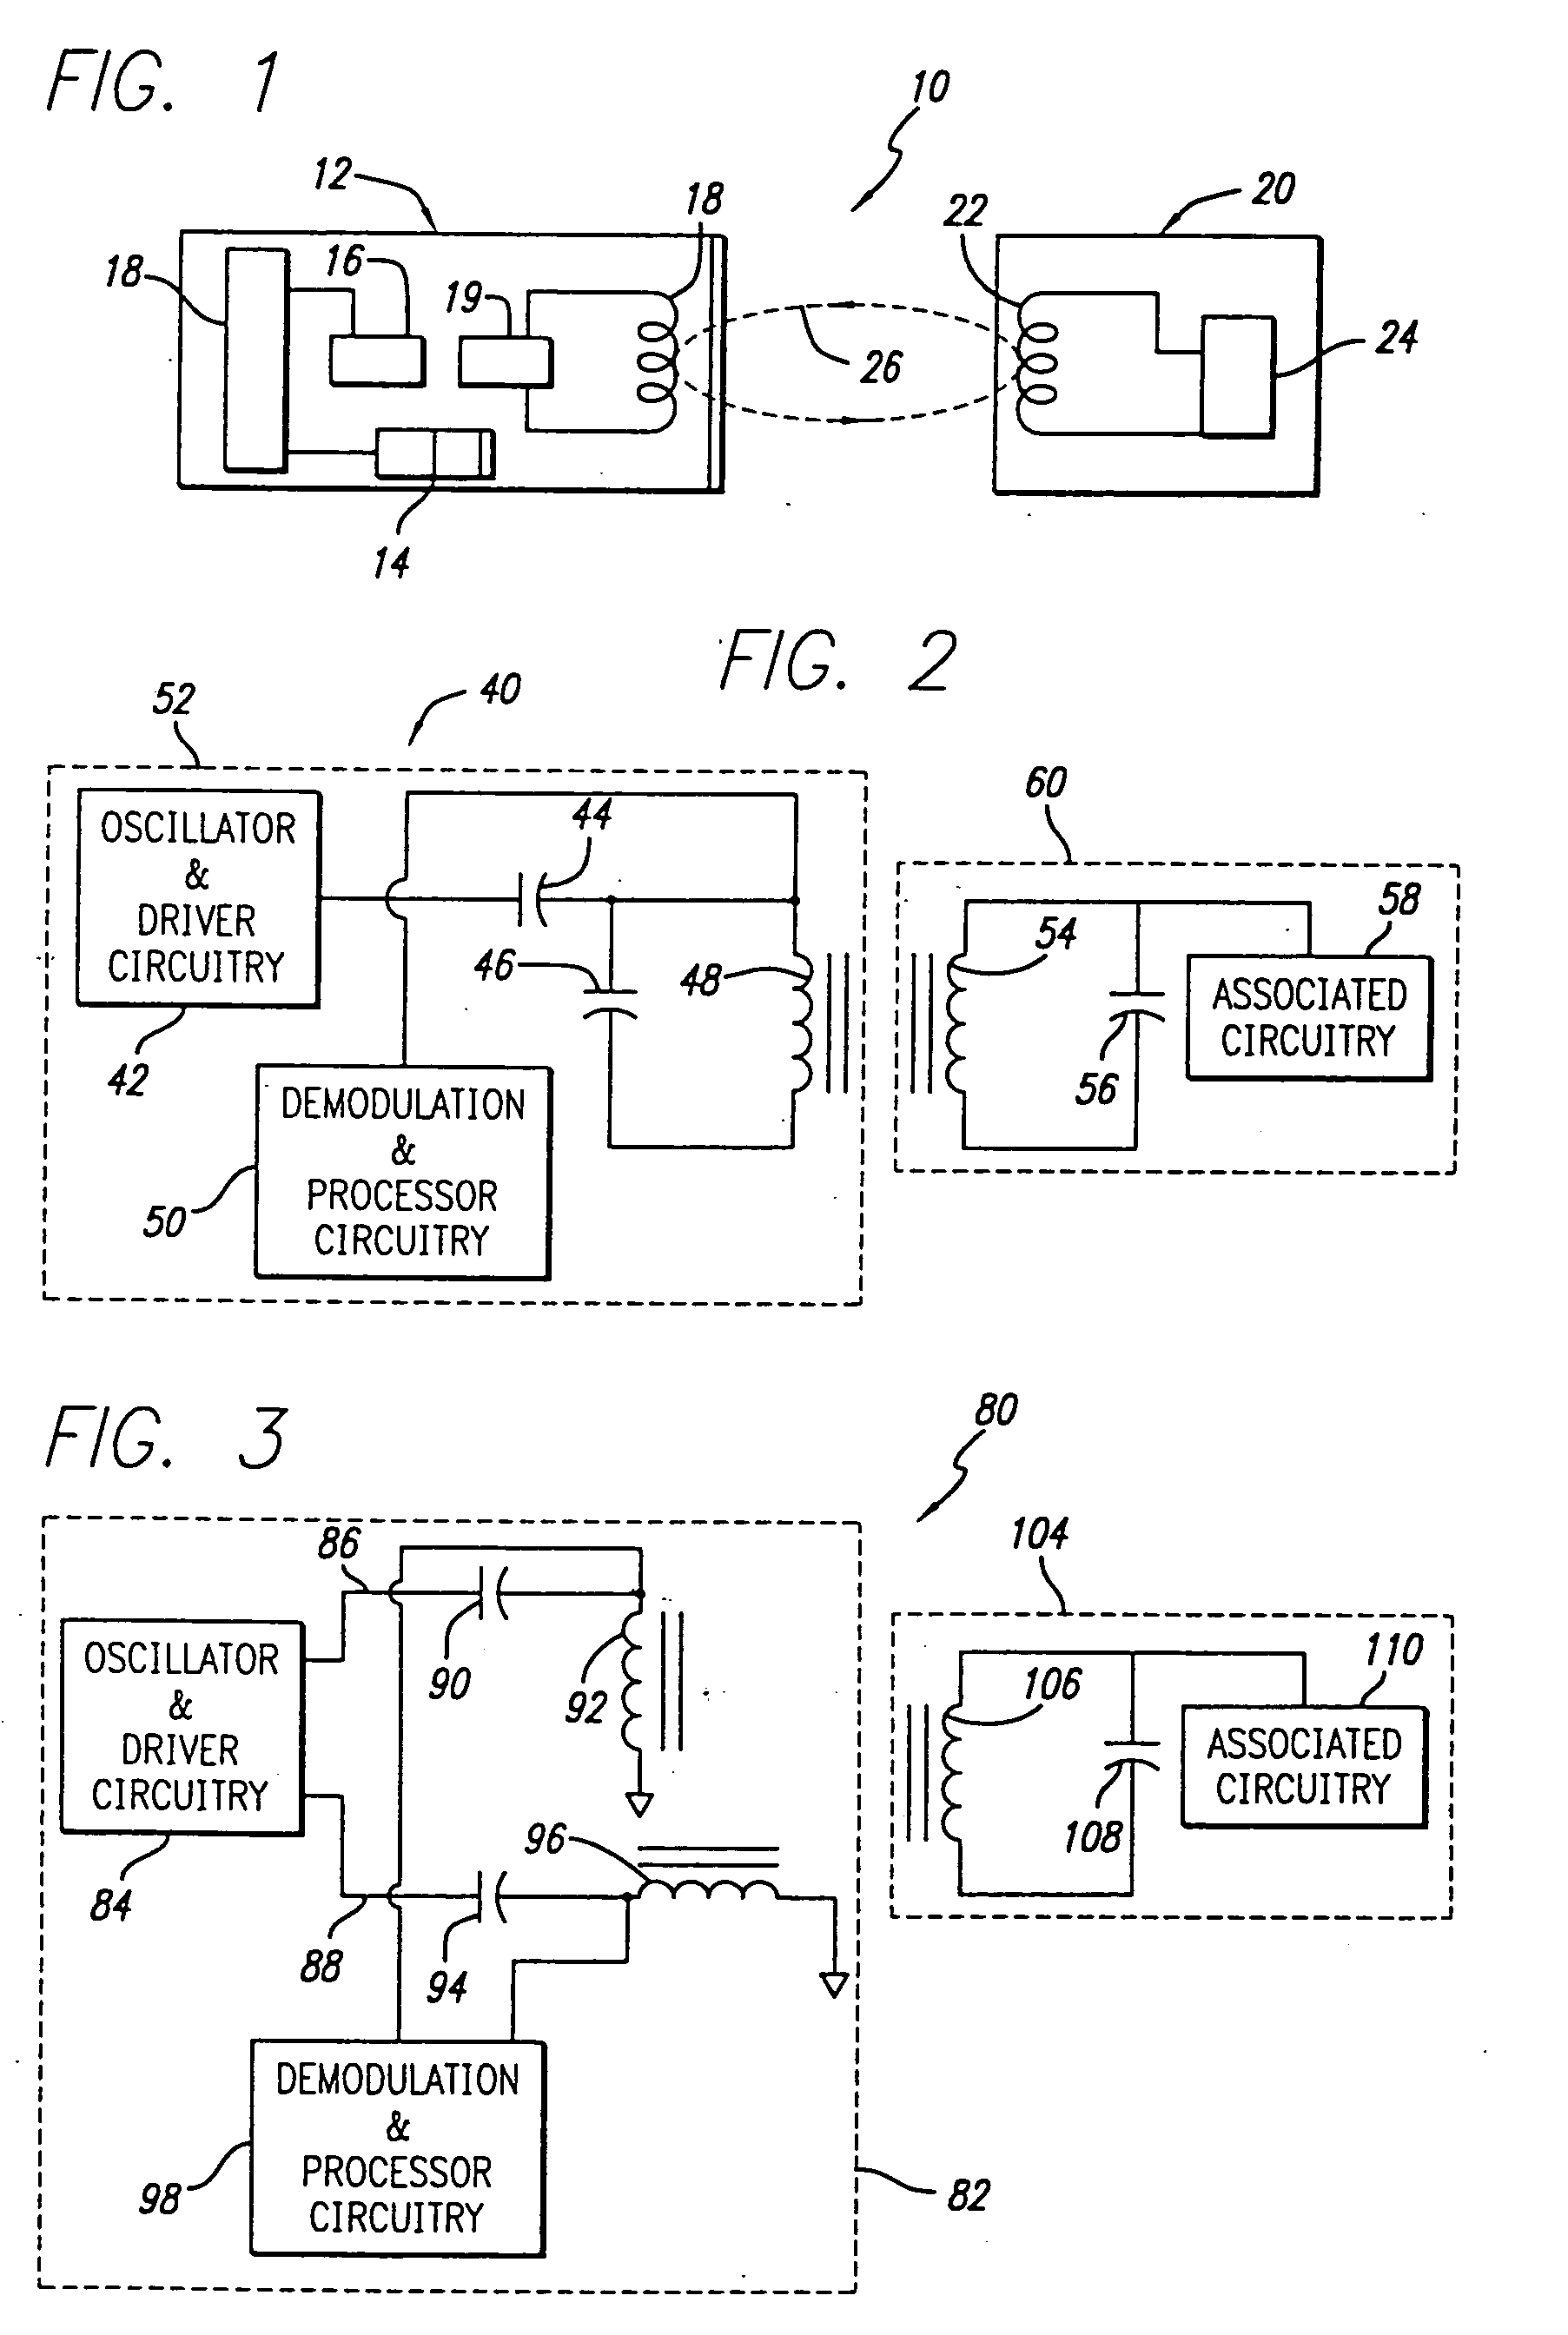 Impedance matching network and multidimensional electromagnetic field coil for a transponder interrogator